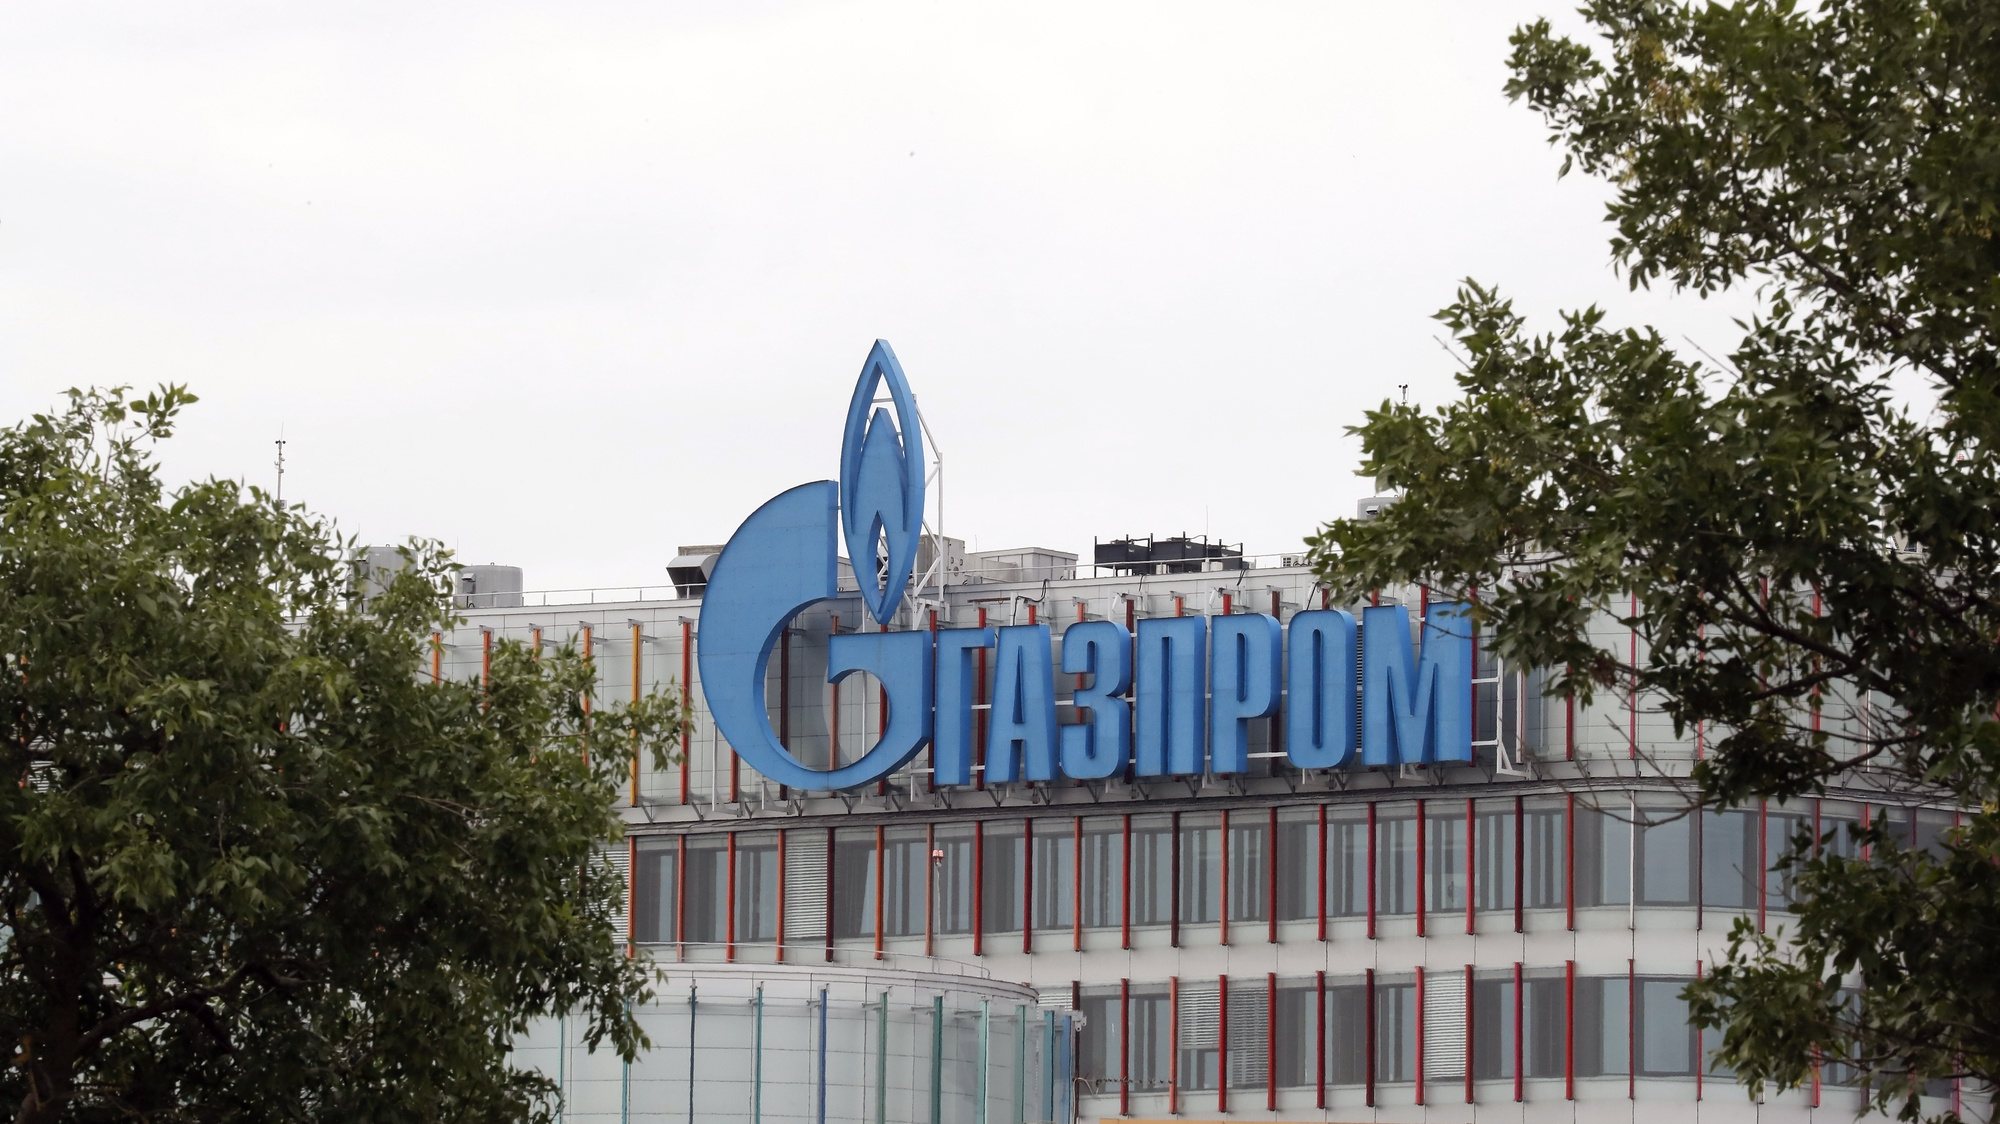 epa10093759 A Gazprom office in St. Petersburg, Russia, 27 July 2022. Russian energy giant Gazprom said on 25 July, citing problems with a turbine, that starting from 27 July the daily gas flow through the Nord Stream 1 pipeline will be set at 33 million cubic meters, just days after it resumed limited flows following a maintenance shutdown. The pipeline is the major delivery route for Russian gas to Europe.  EPA/ANATOLY MALTSEV